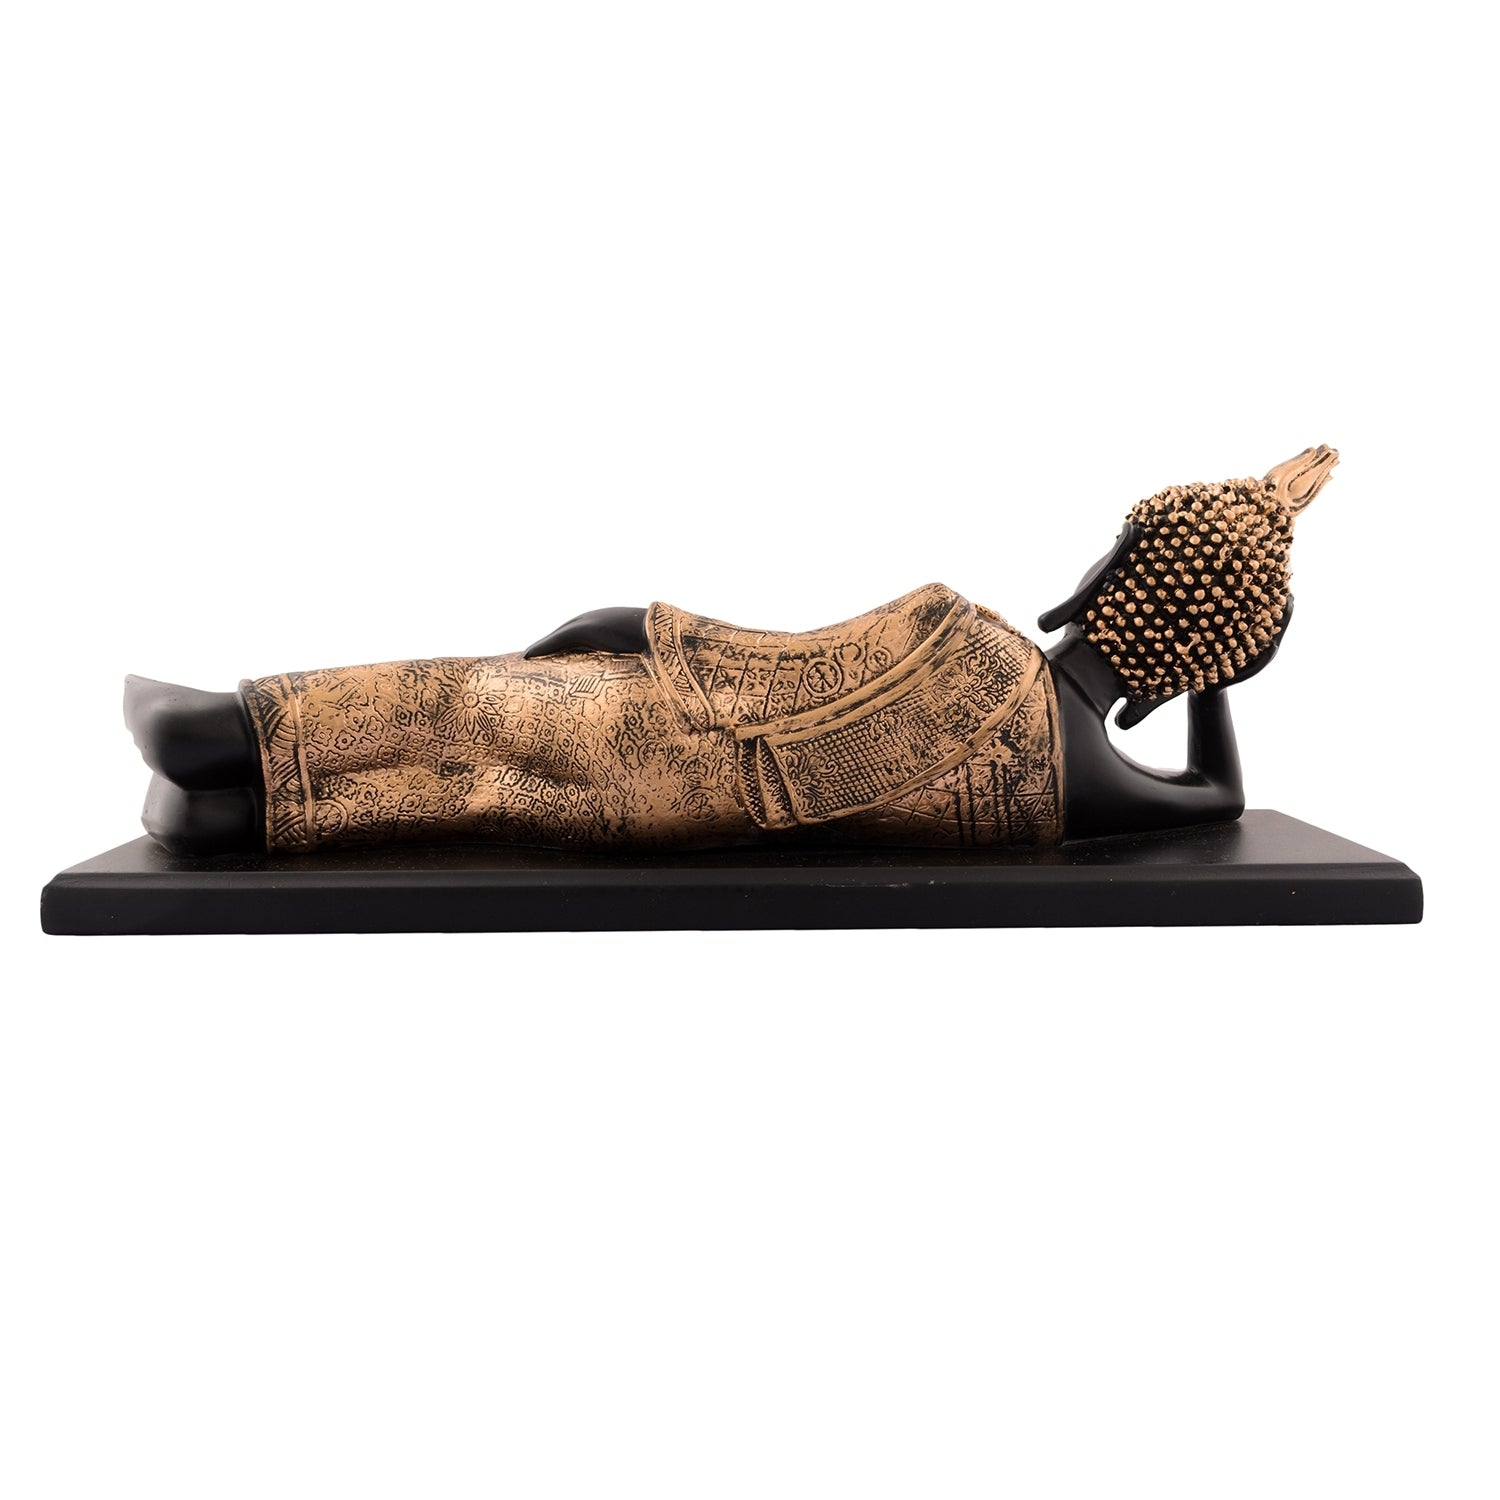 Polyresin Black and golden Resting Buddha Statue on Wooden Board 3